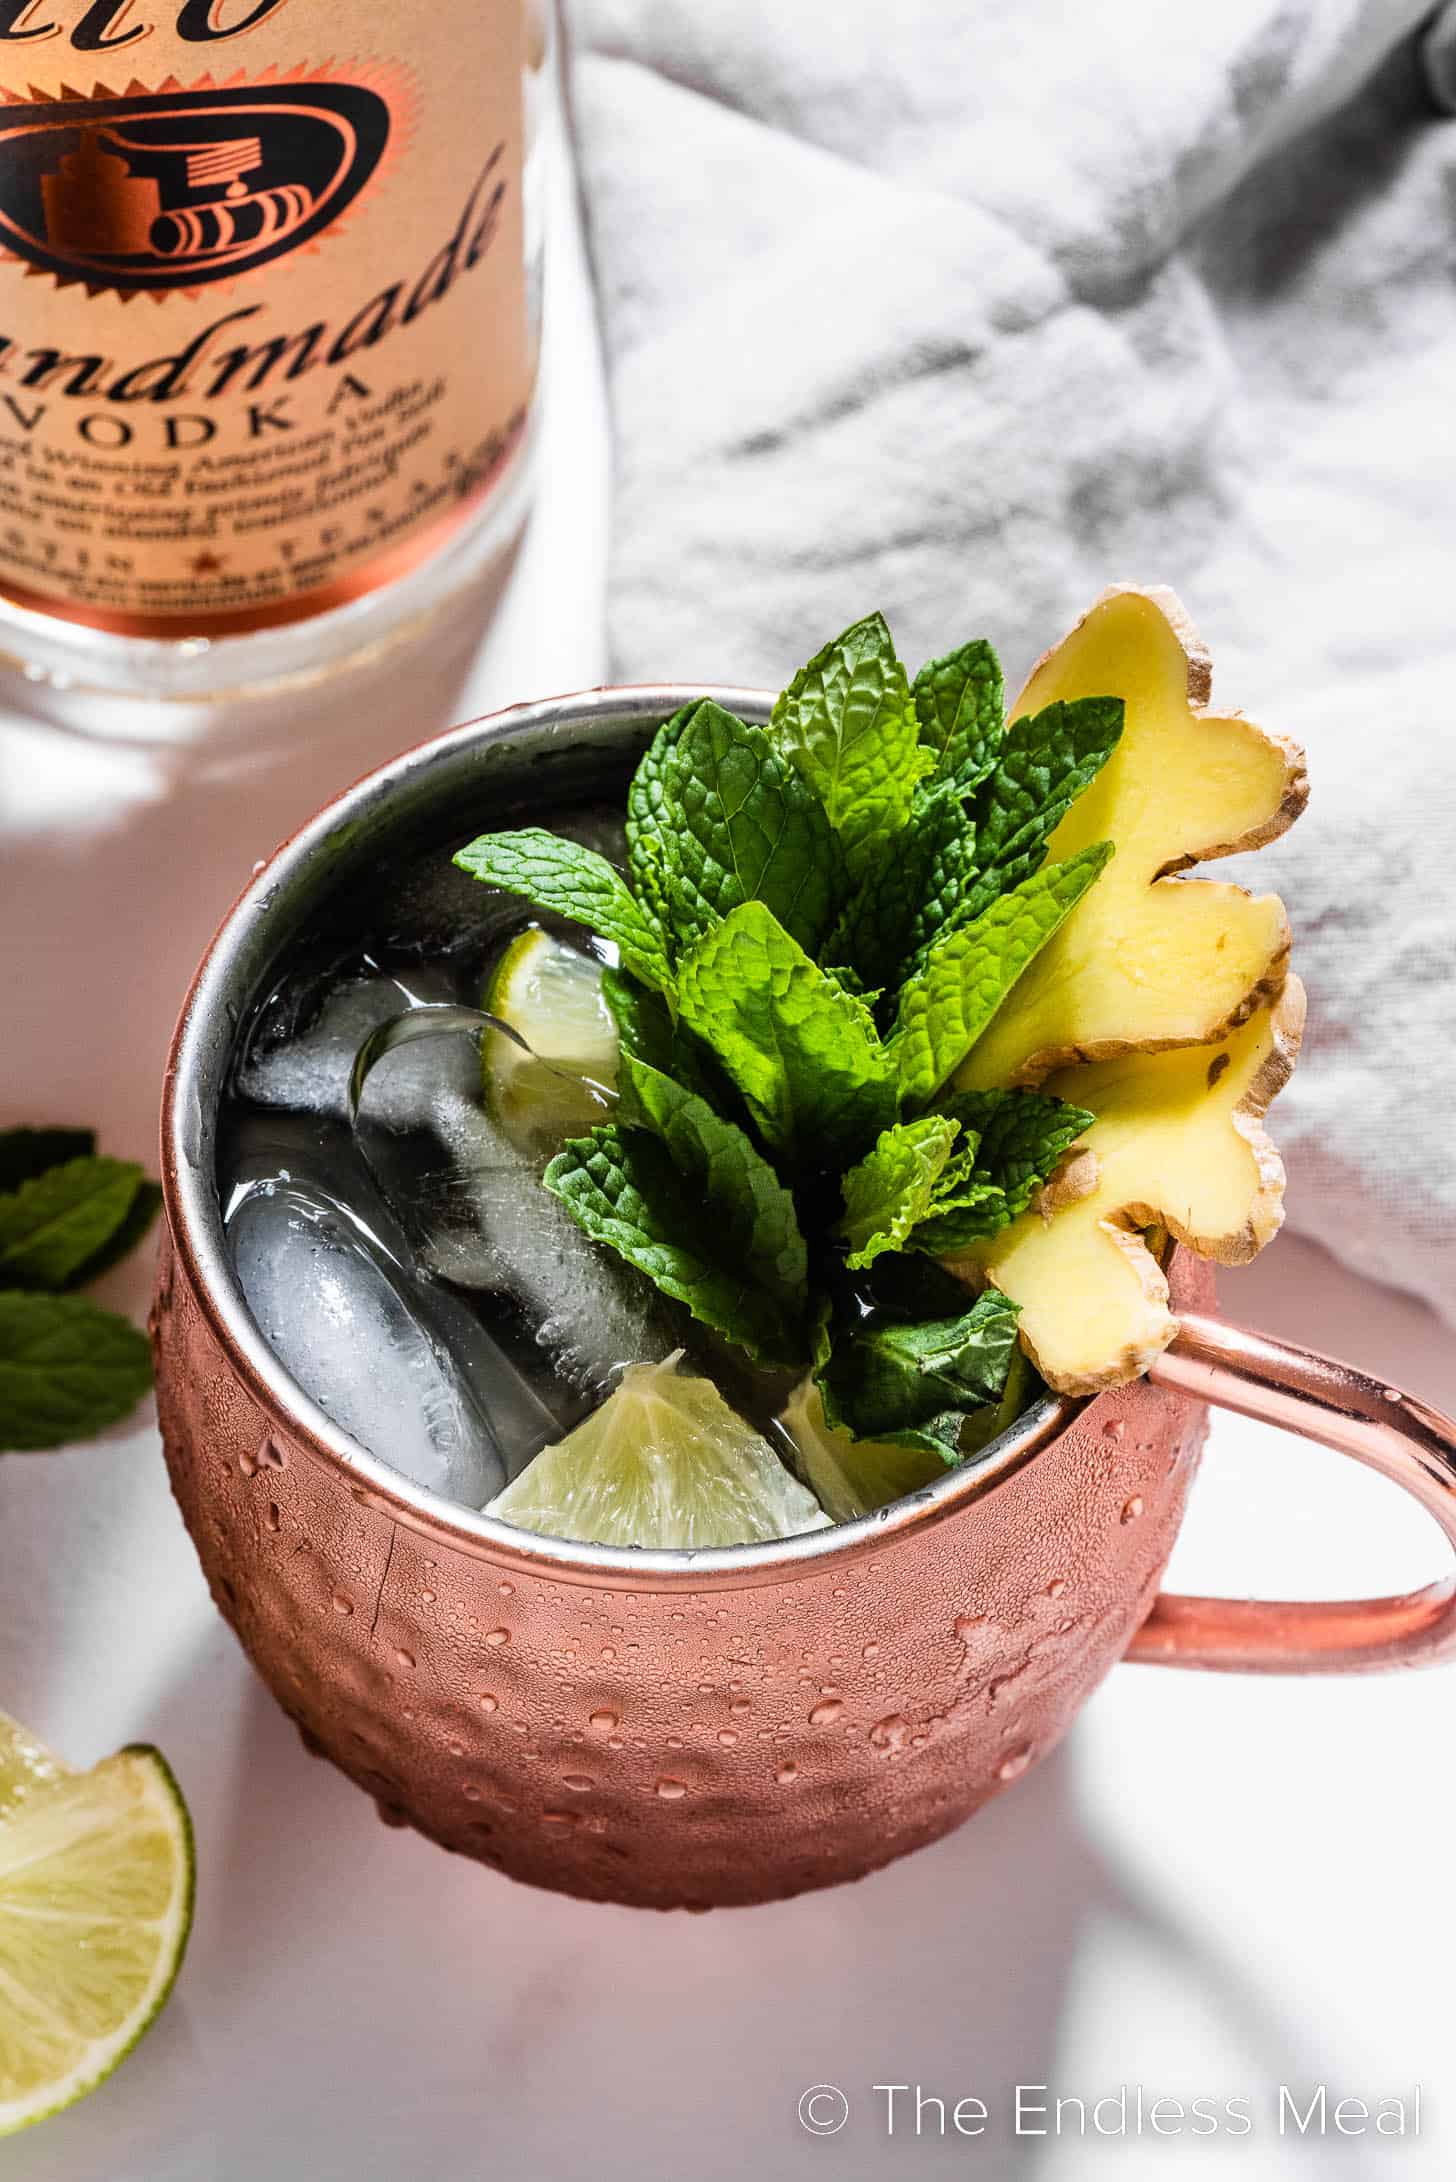 A well garnished Moscow Mule